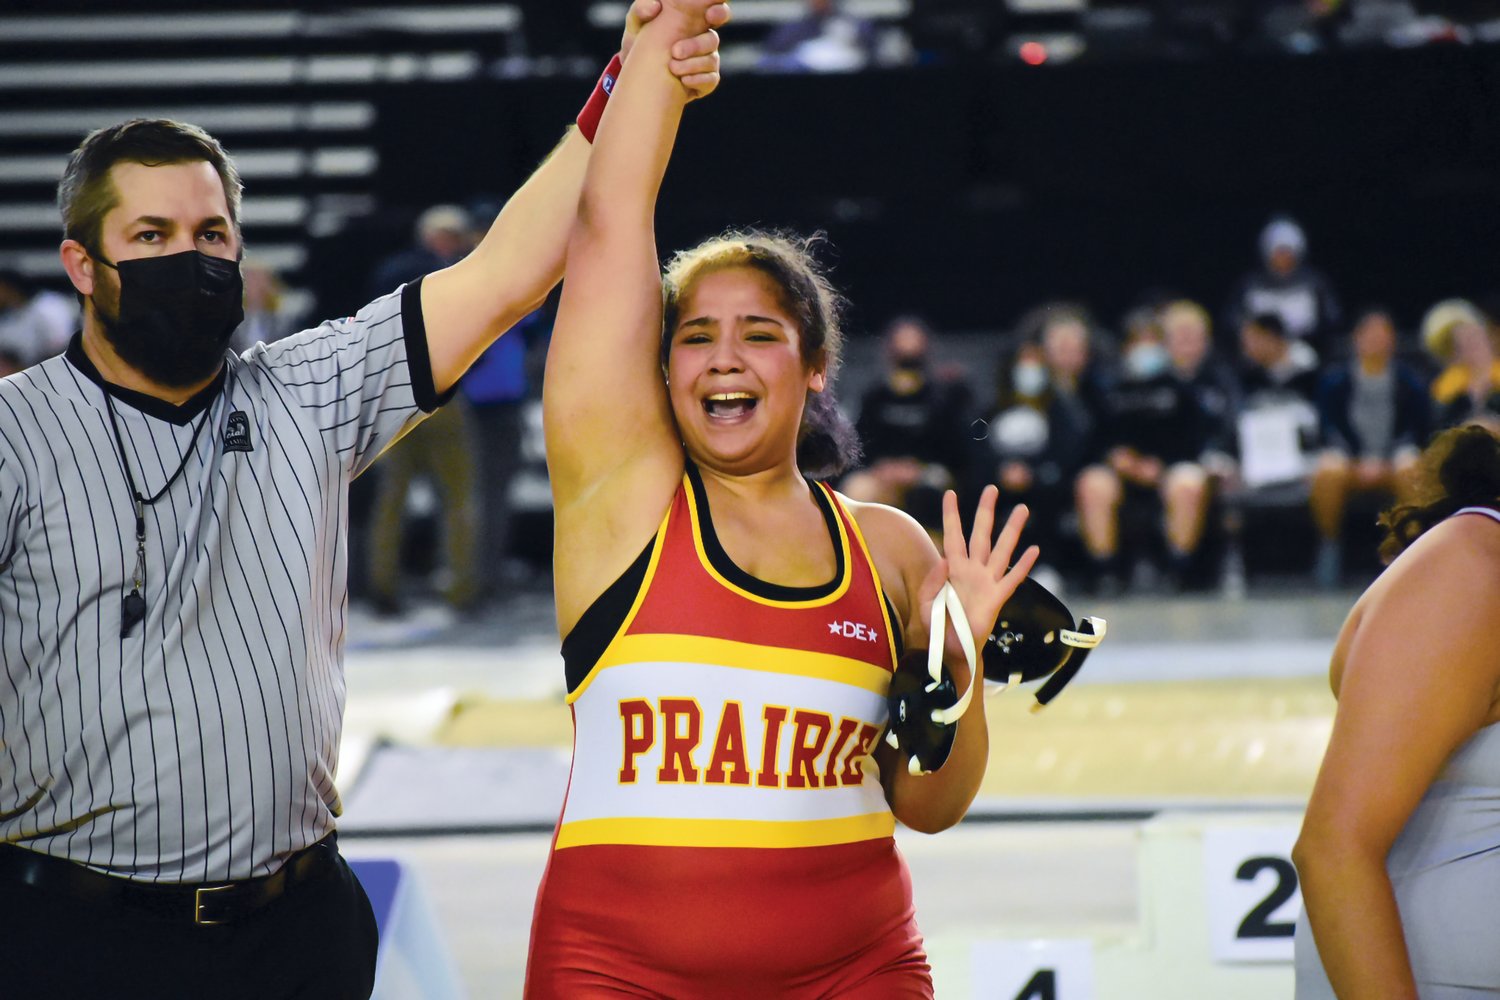 Prairie High School freshman Faith Tarrant celebrates her victory after she placed first at the Mat Classic in Tacoma. Tarrant is the first girl wrestler from Prairie High School to win a state championship in wrestling. Prairie High School senior Alex Ford also won the state championship in the boys 3A 160-pound division, as a handful of other local wrestlers placed at the tournament.